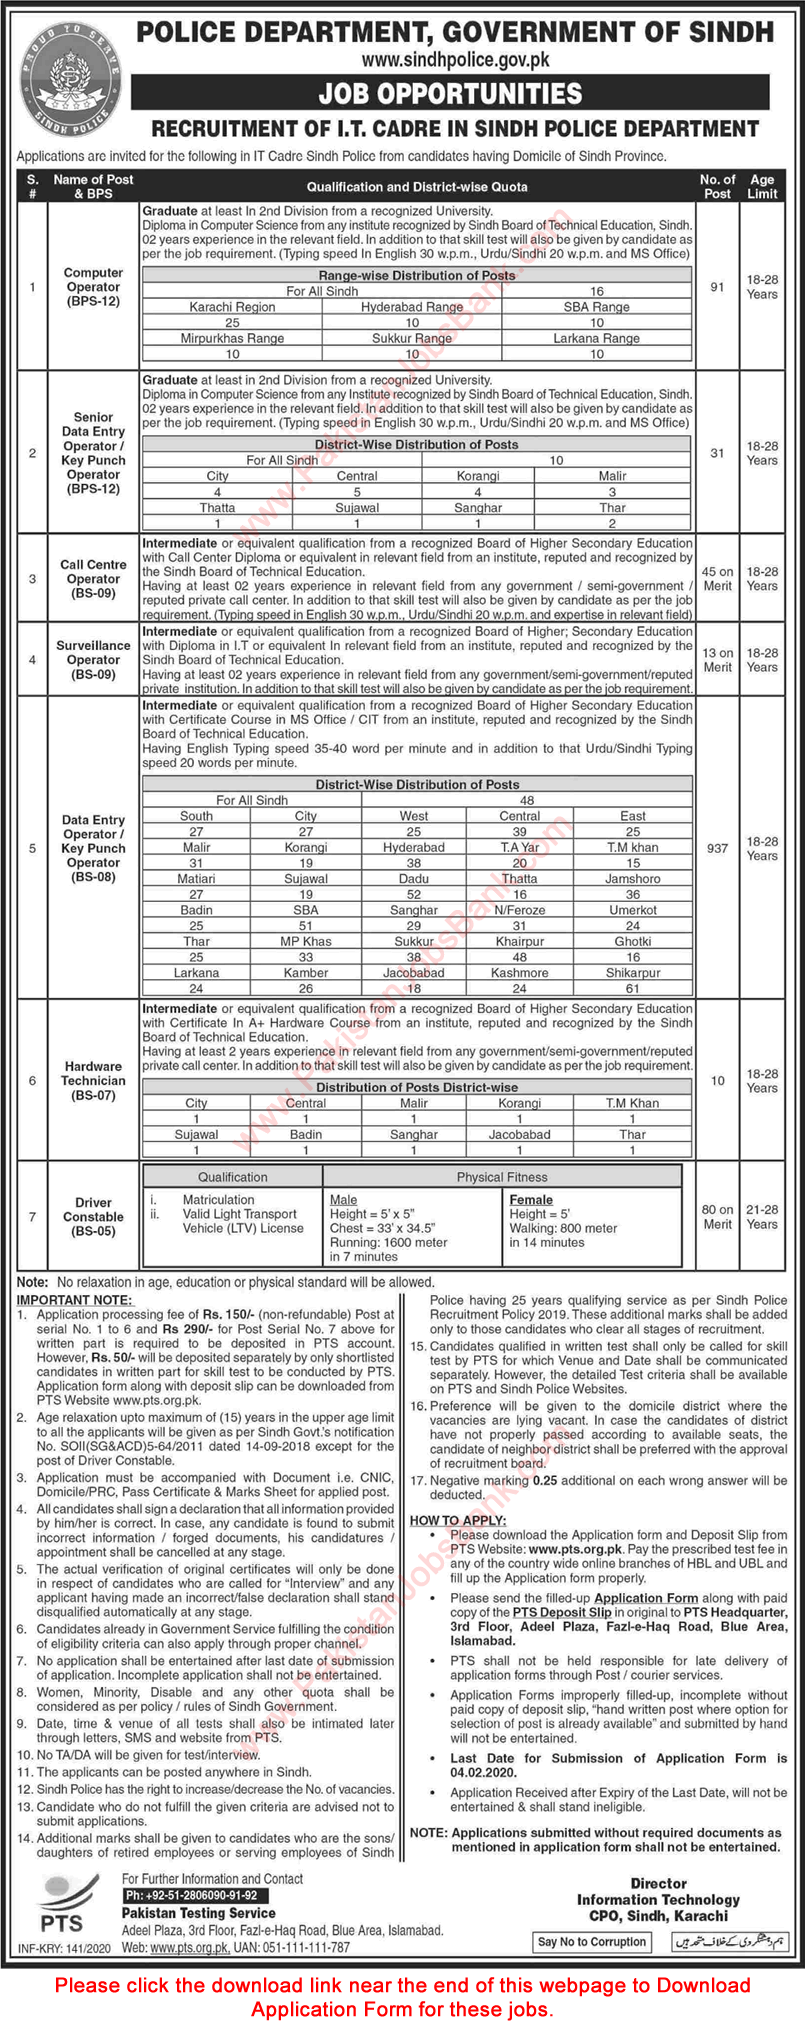 Sindh Police Jobs 2020 PTS Application Form Data Entry / Computer Operators & Others Latest